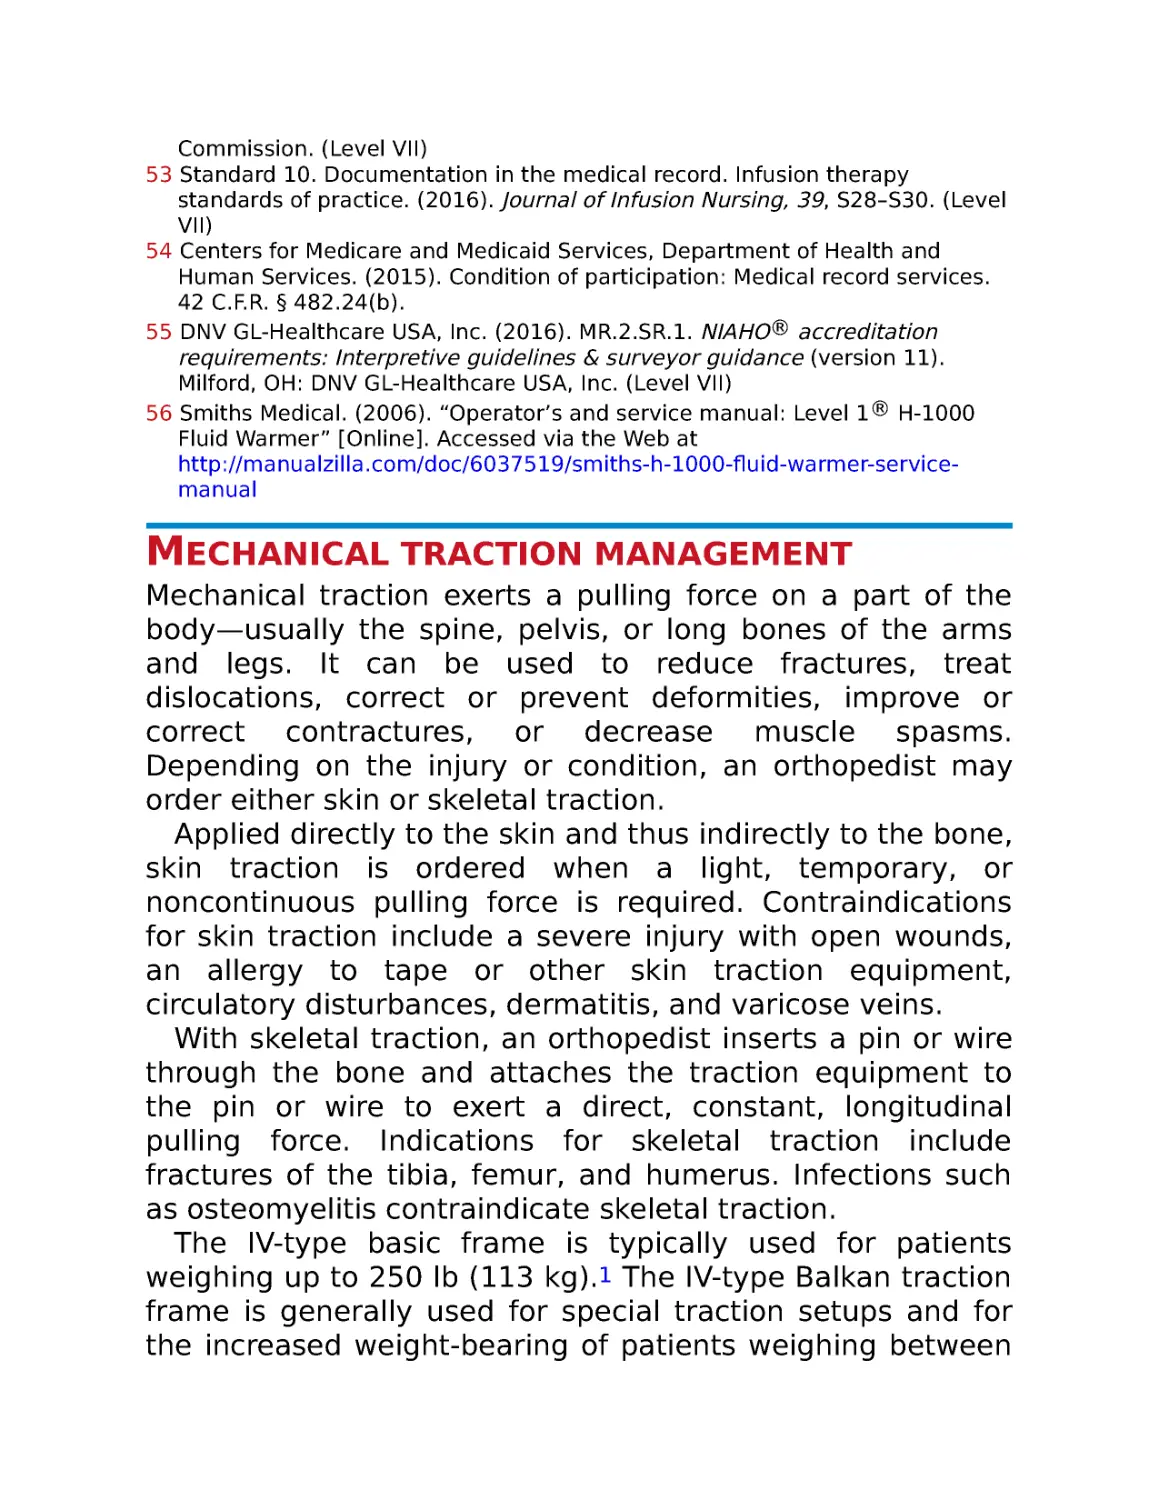 Mechanical traction management